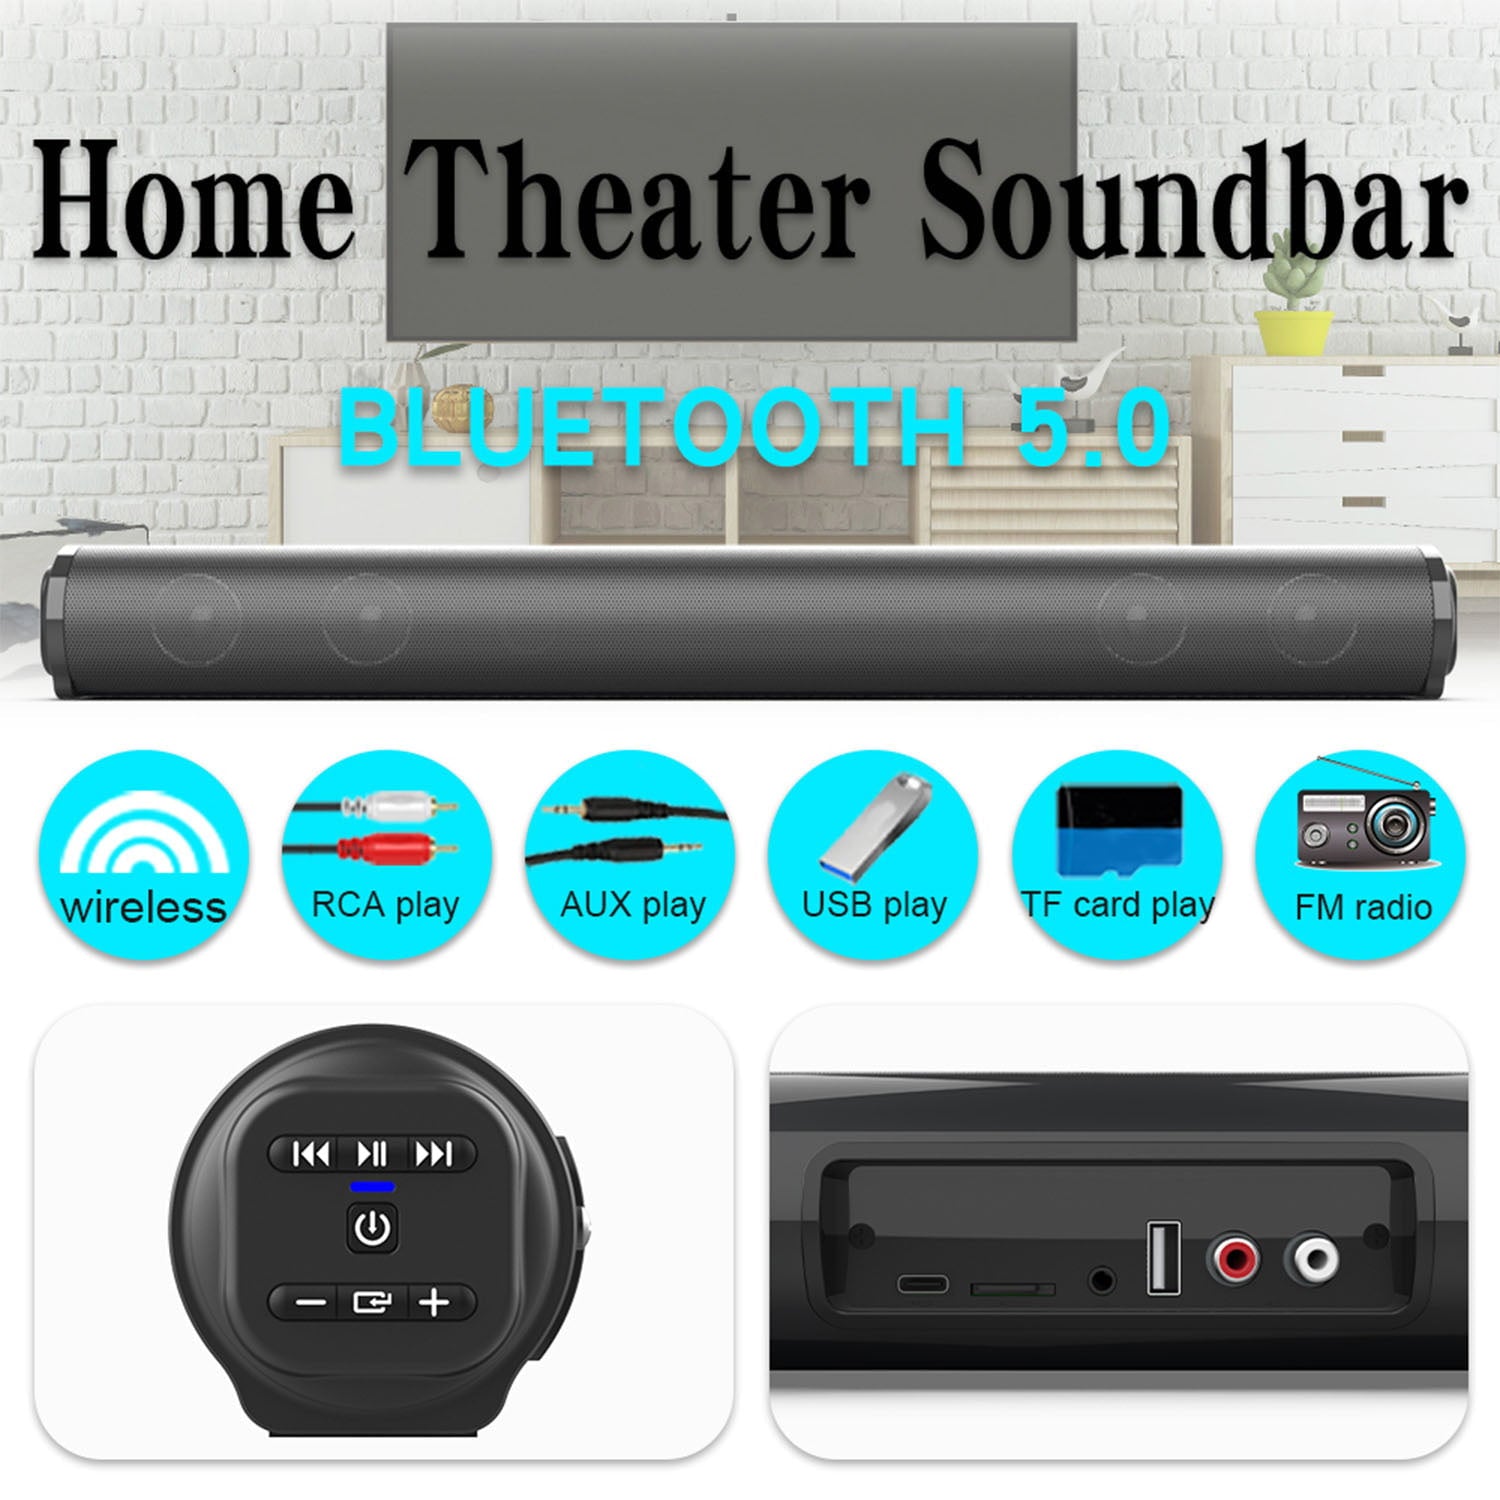 vinsic Sound Bar for TV, 23 in Soundbar Built in Subwoofer with HDMI USB RCA AUX COAX Connection TV Speaker for Home Theater, Wall Mountable, Black